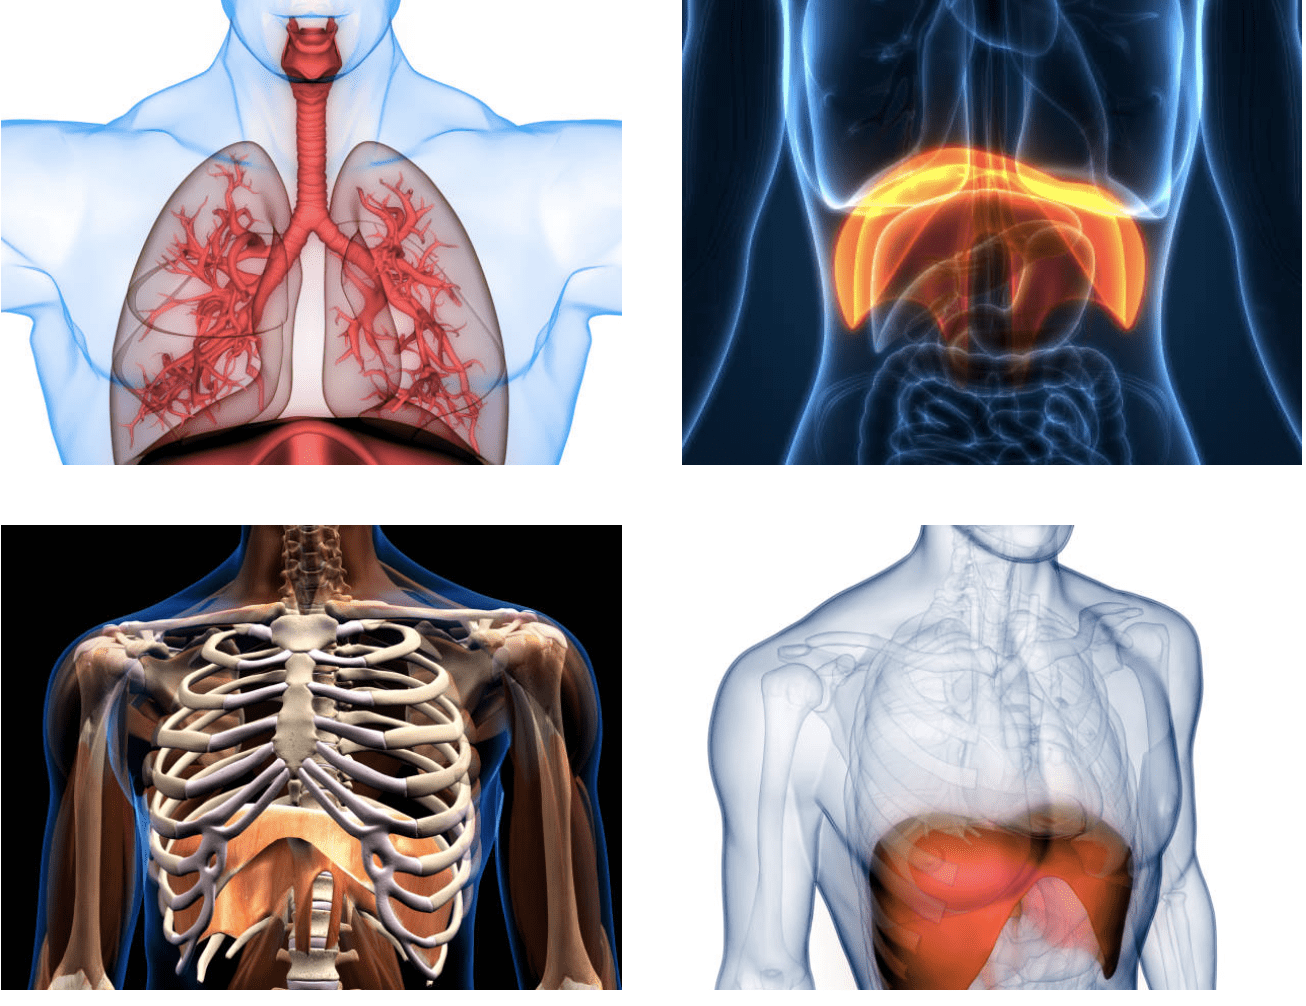 The Diaphragm: An underrated Core Muscle by Dr. Hailey Jackson